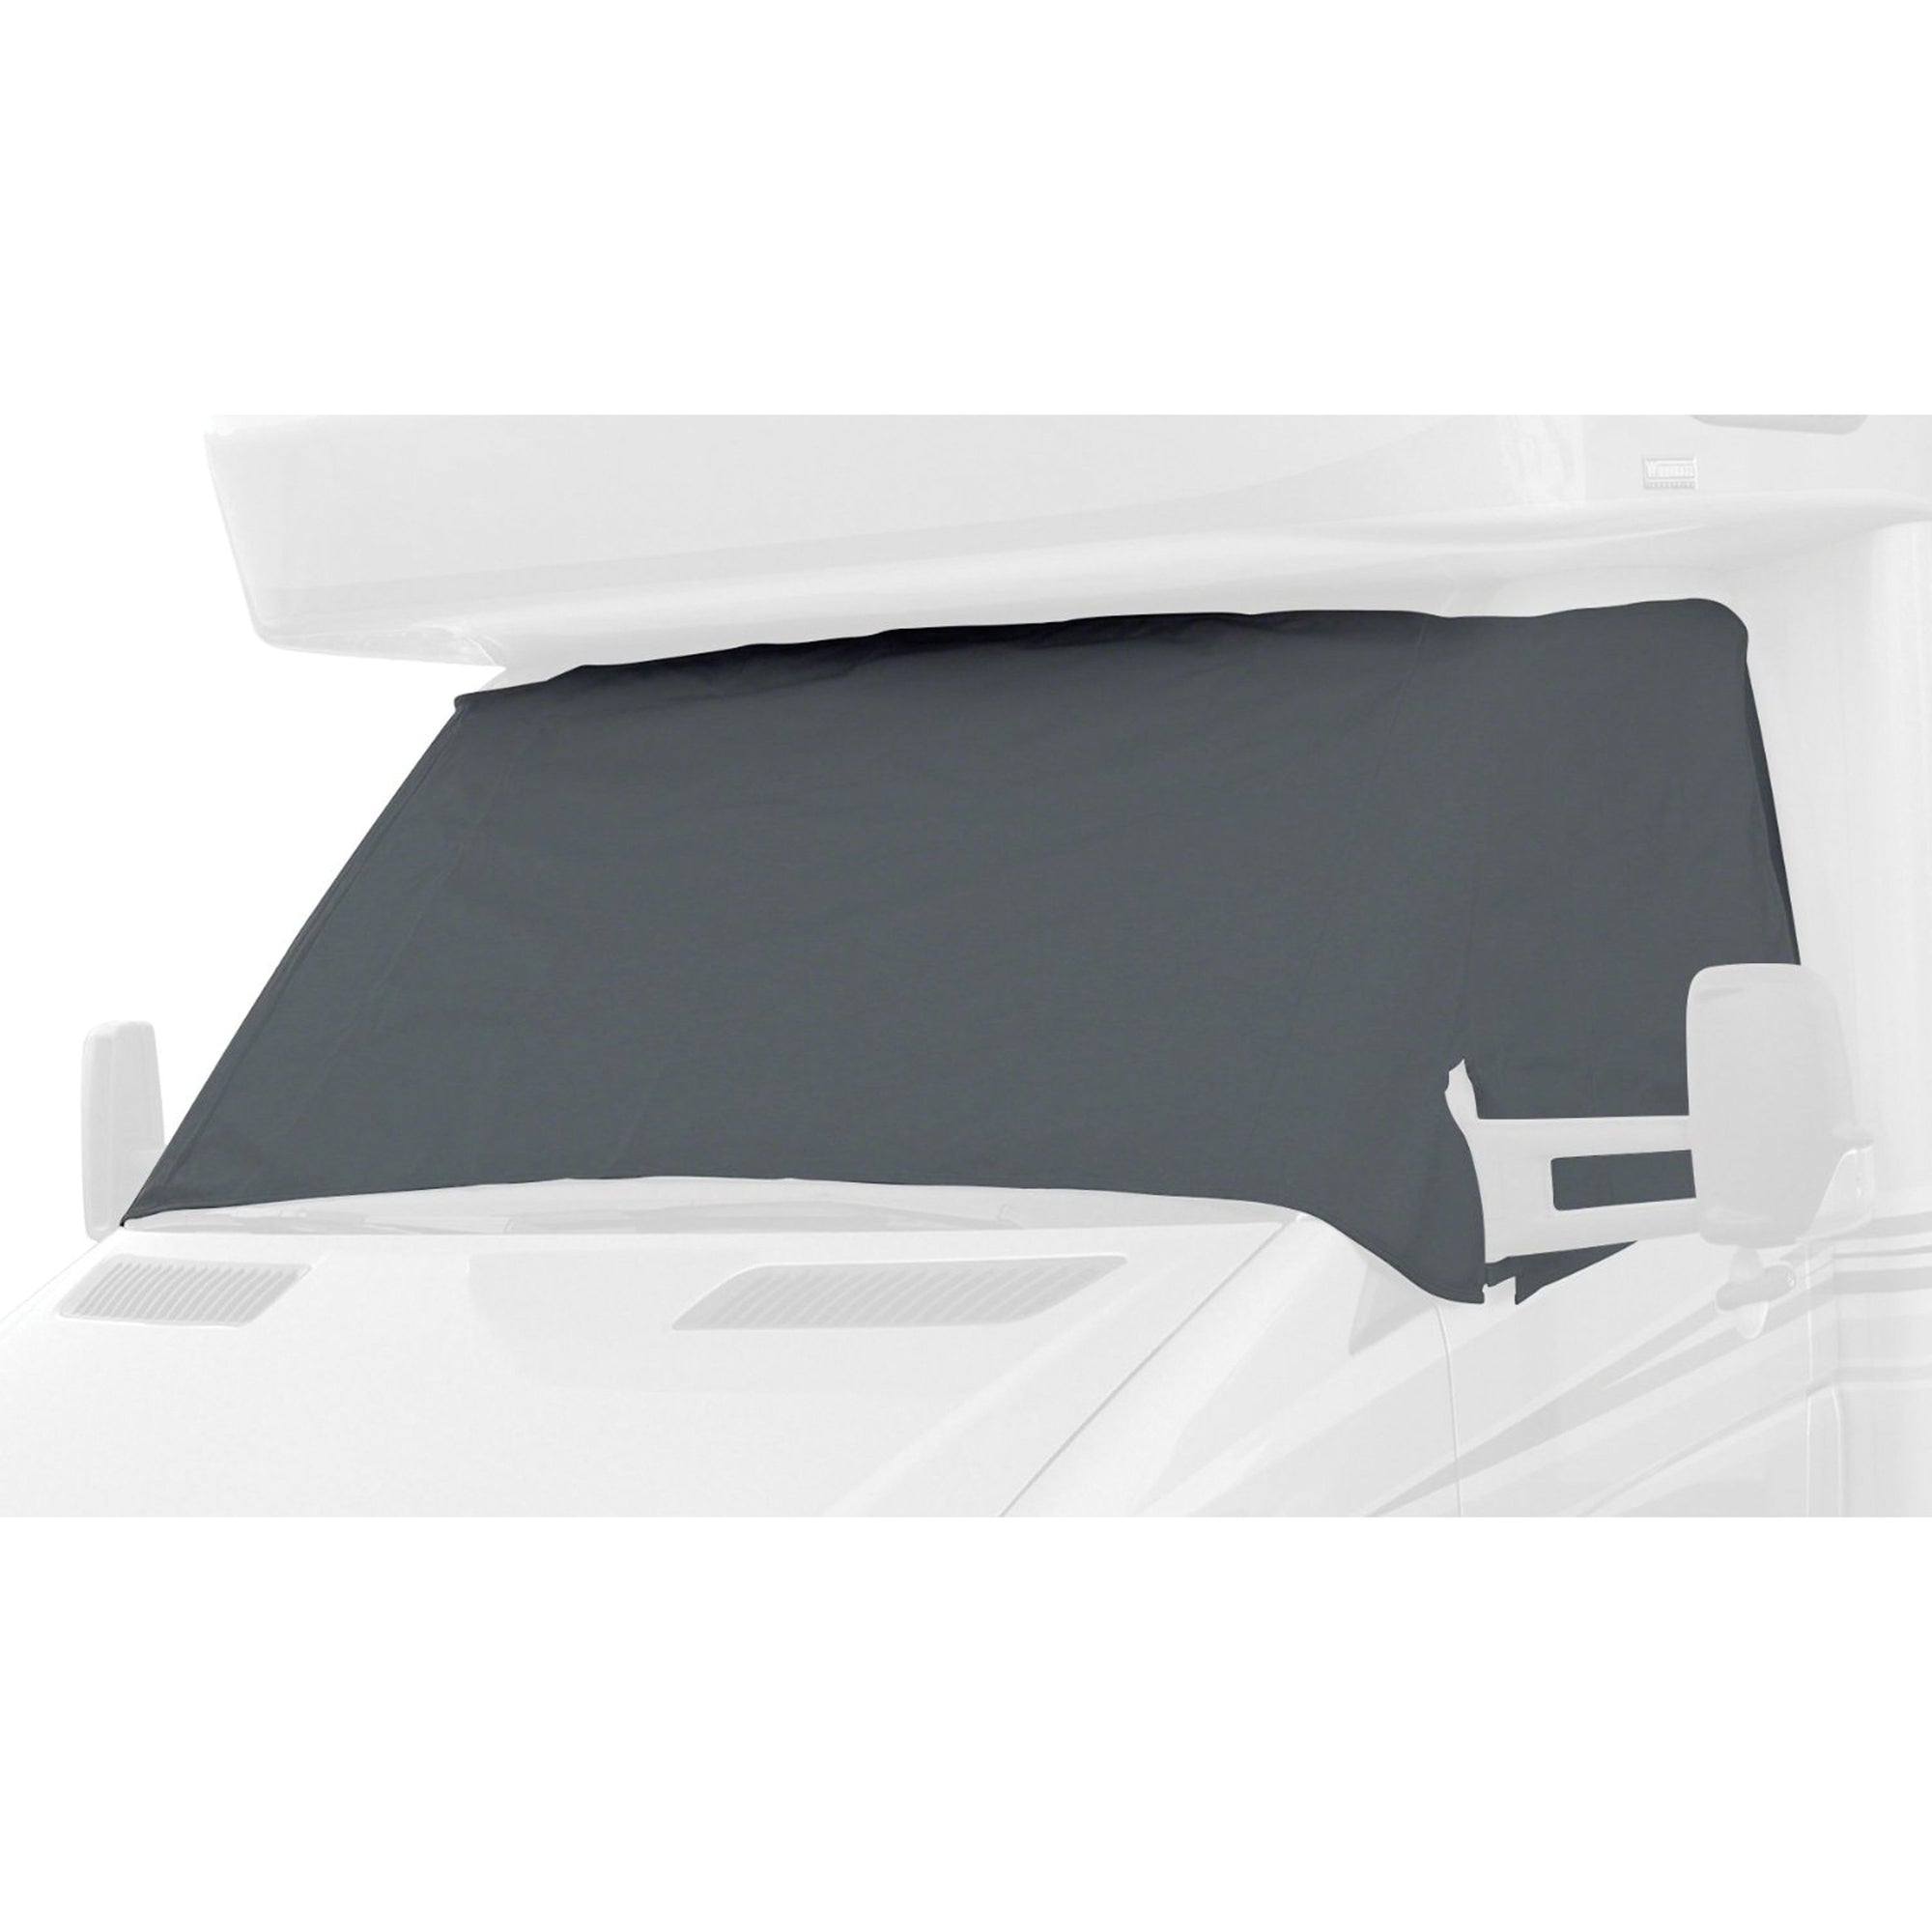 Classic Accessories 80-076 Class C Vinyl Windshield Cover - For Ford '73 to '91